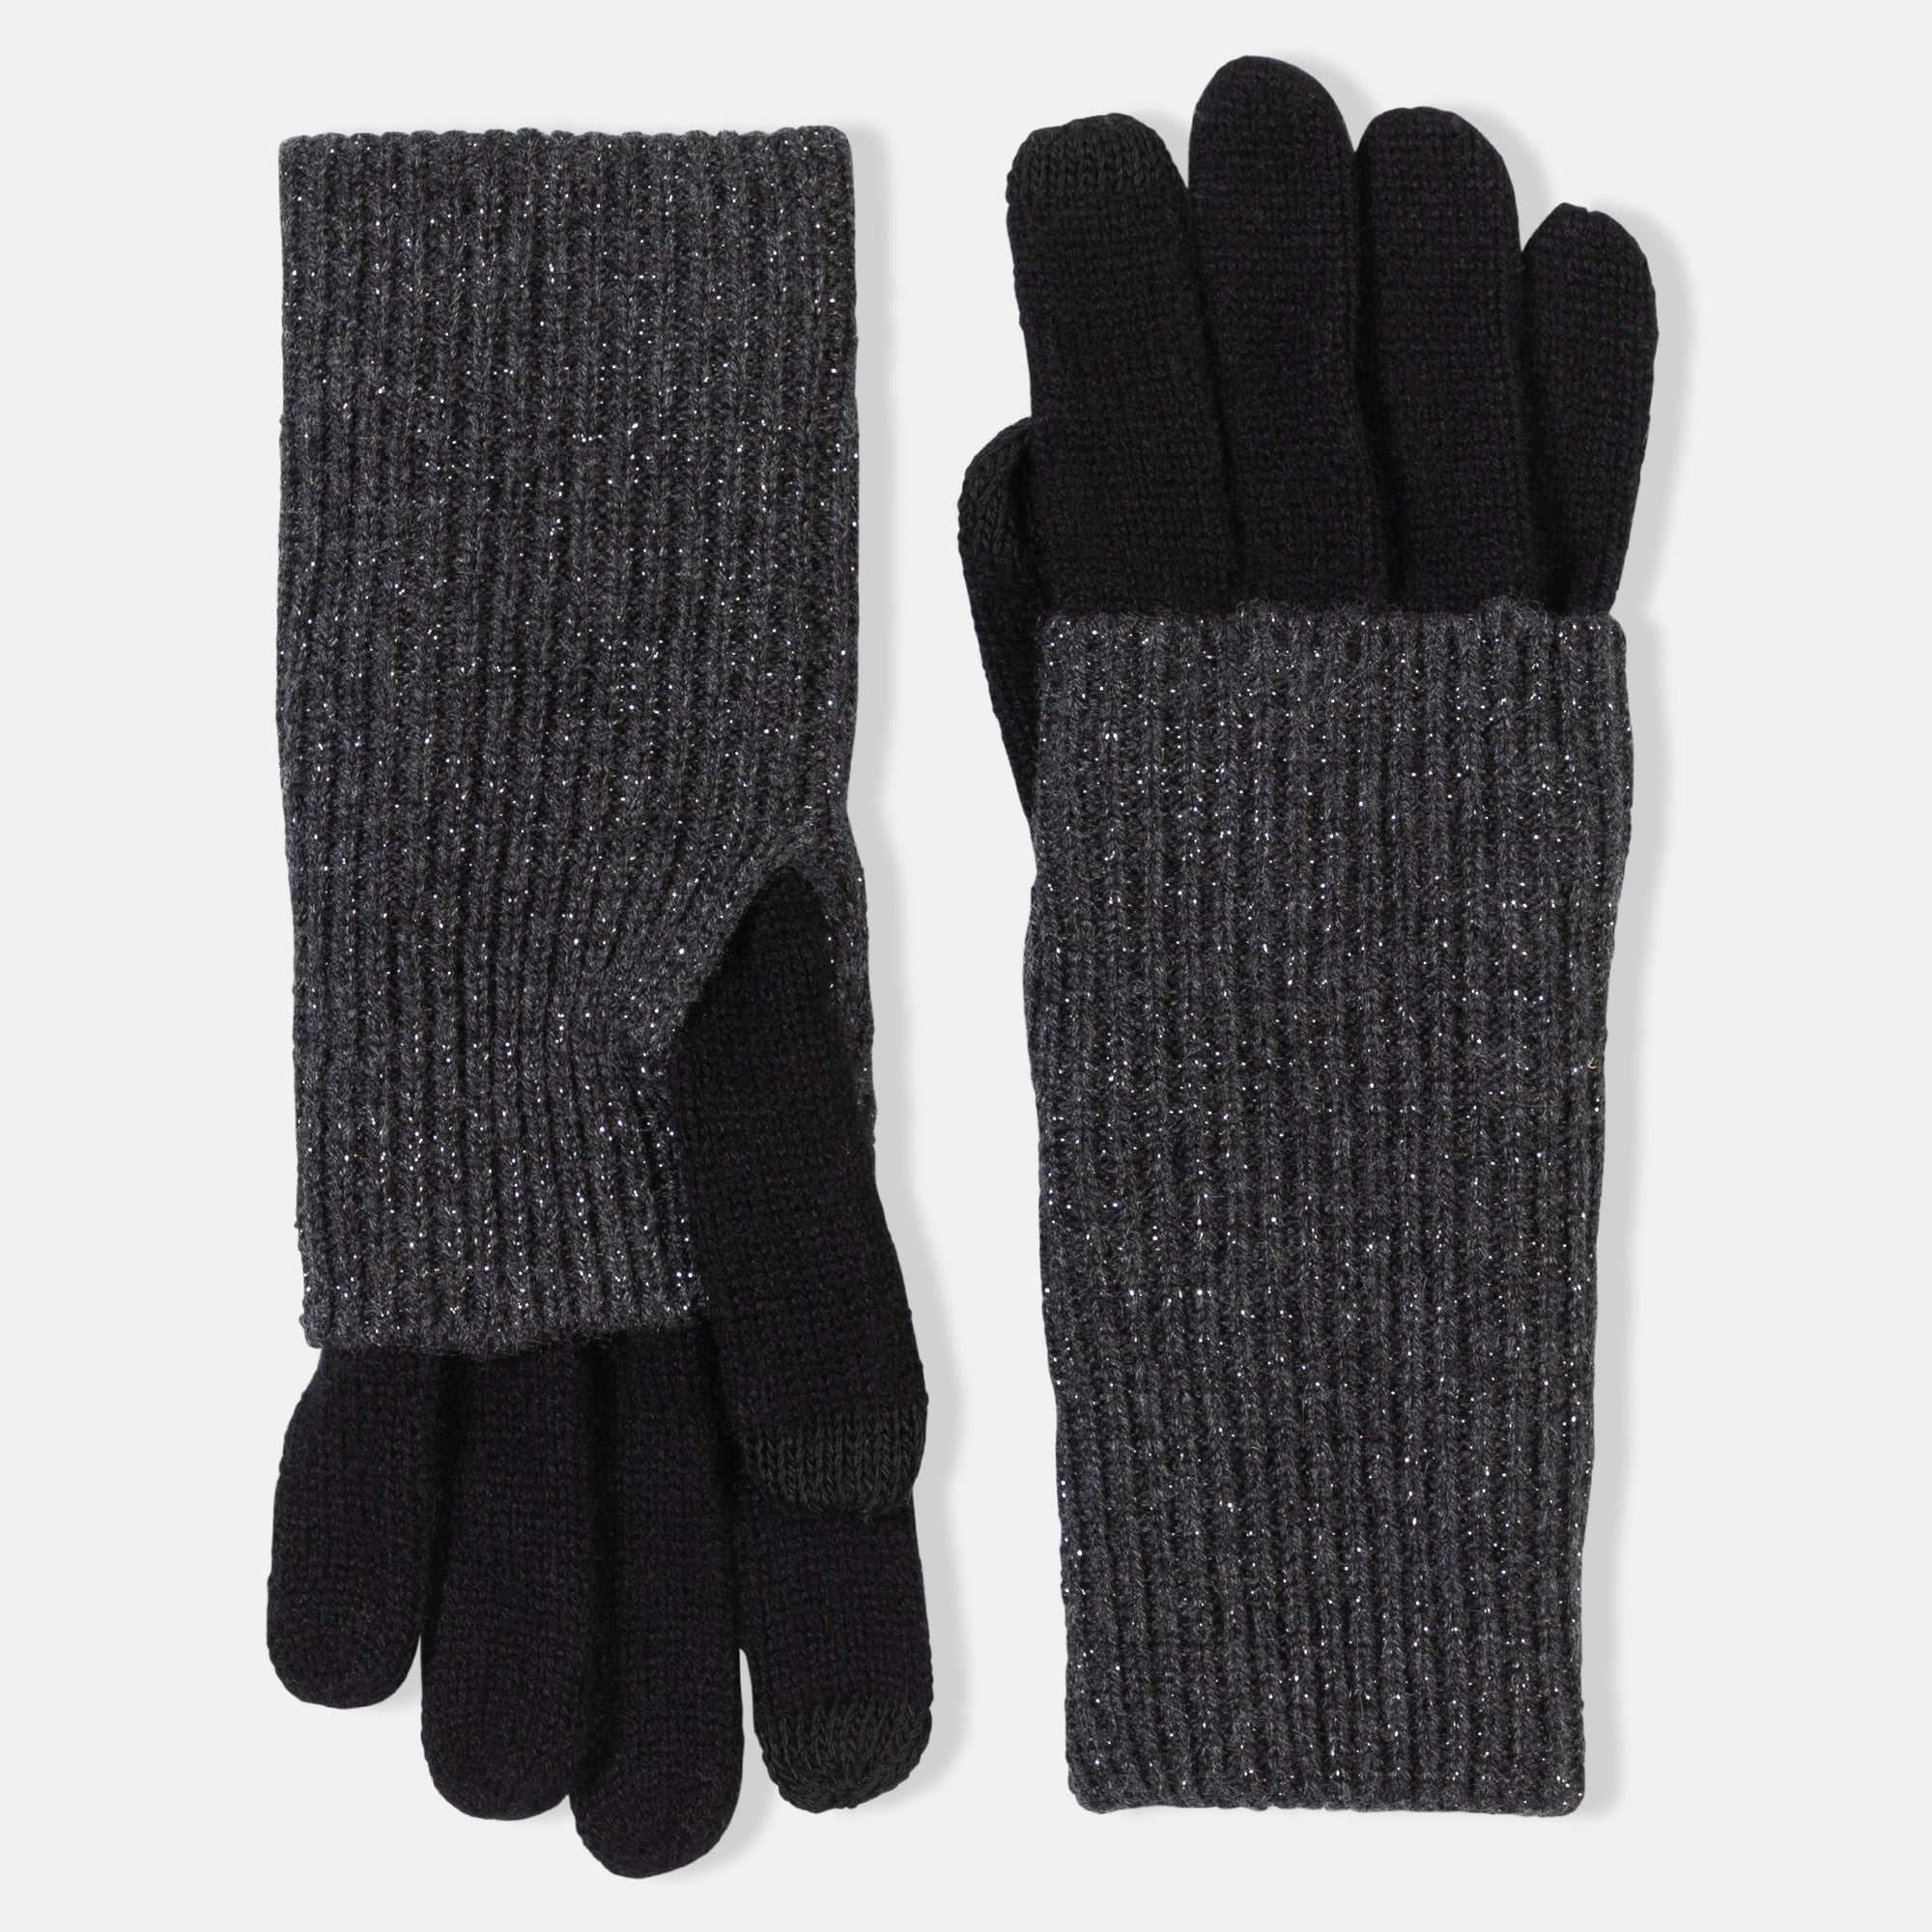 Picture of knitted cashmere gloves with foldover contrast sparkle cuff in black and grey.